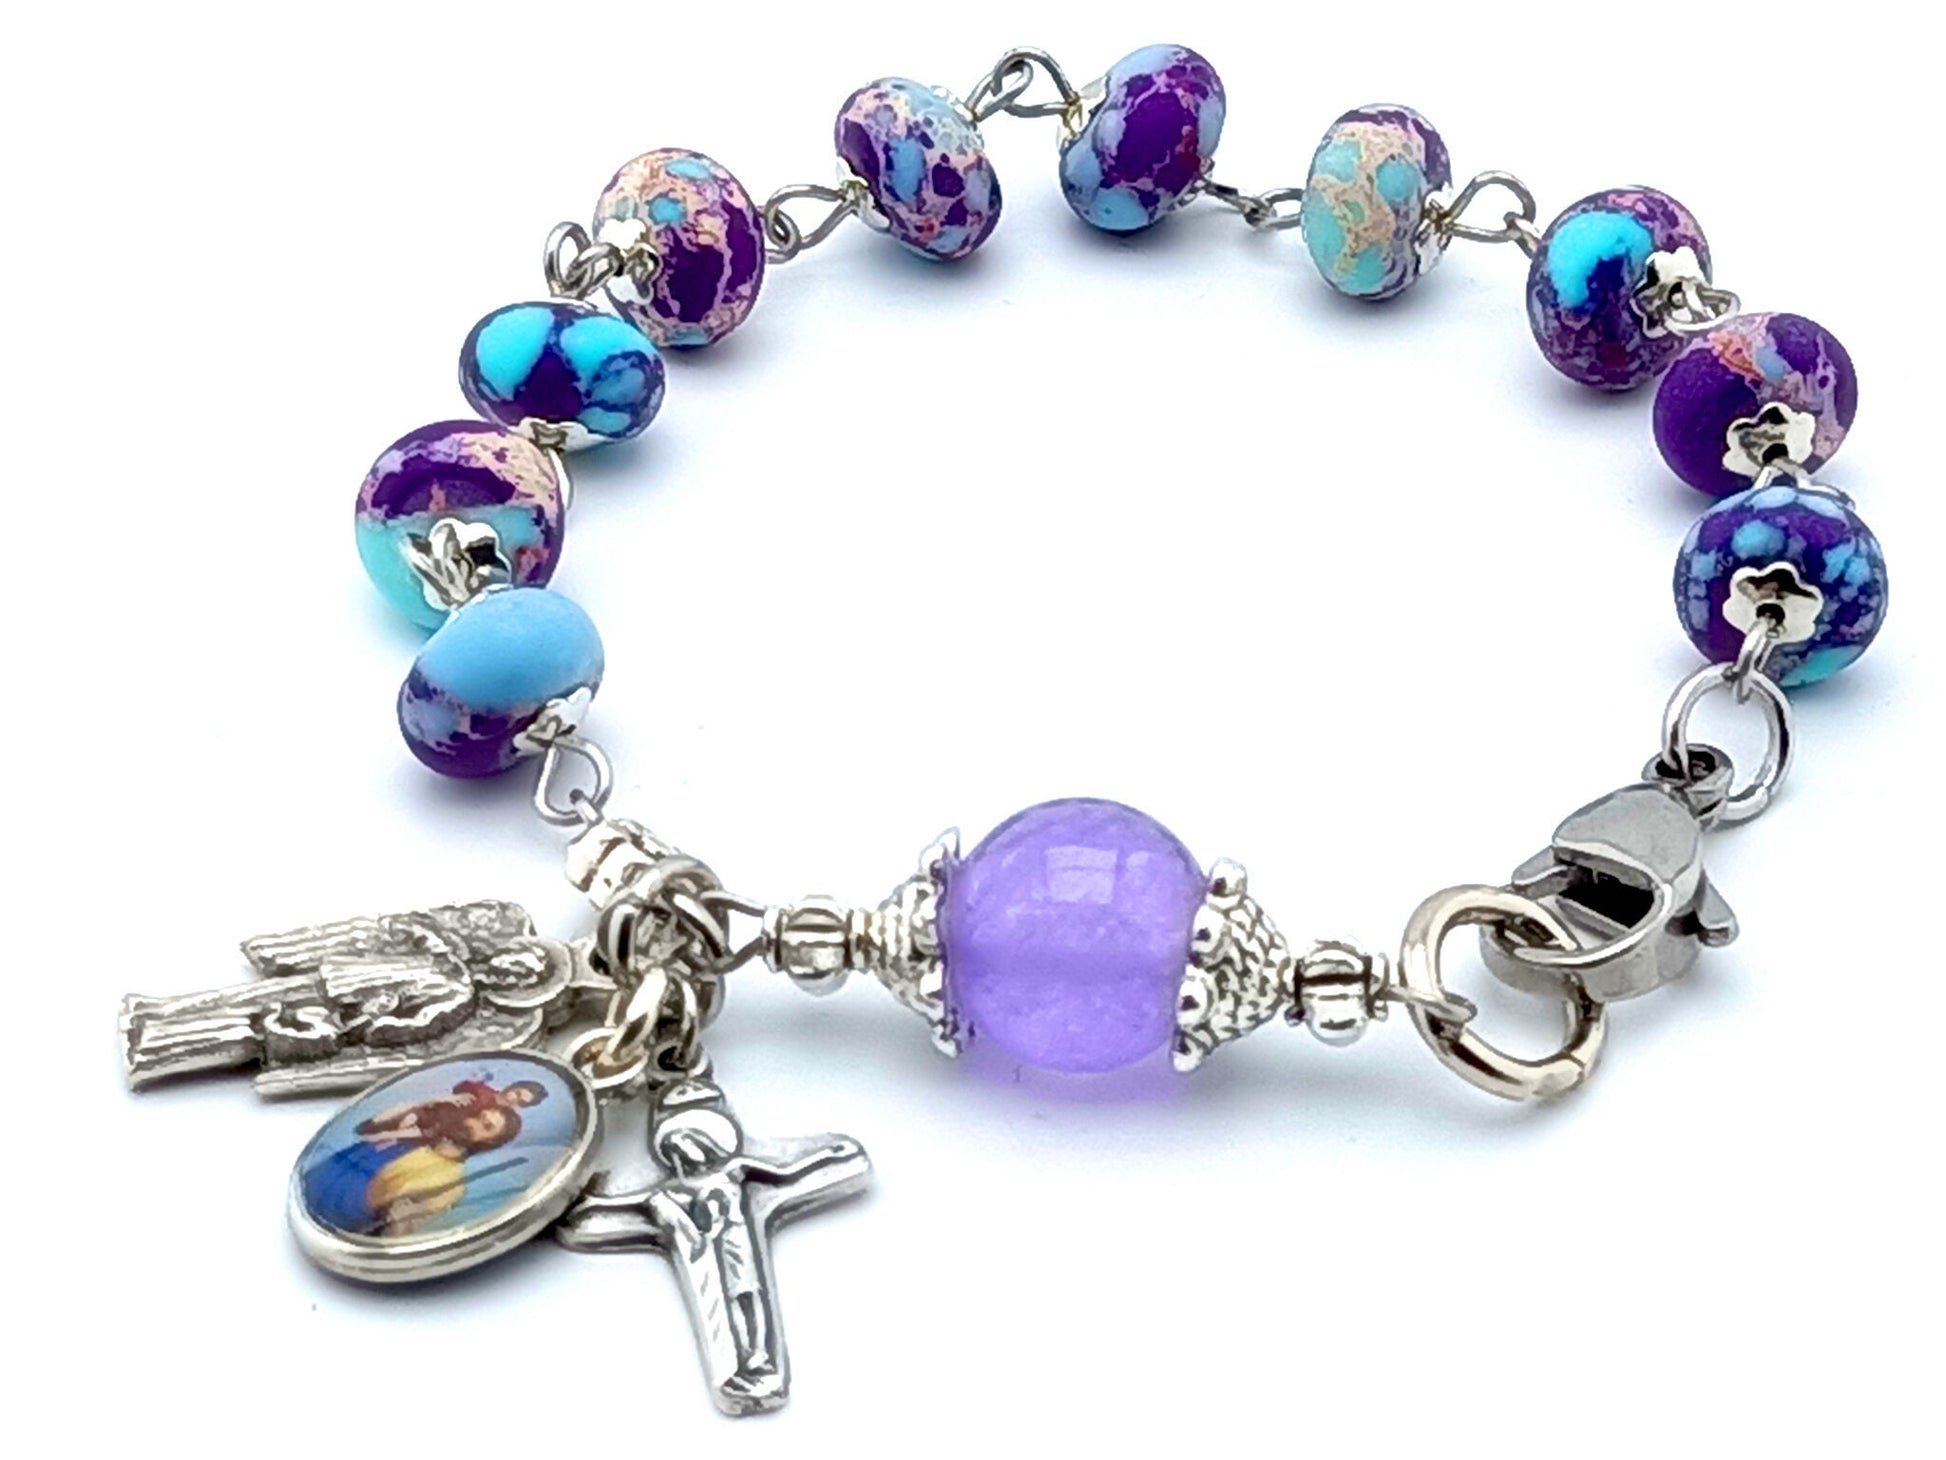 Saint Christopher unique rosary beads single decade rosary bracelet with agate and alexandrite gemstone beads, silver medals and crucifix.